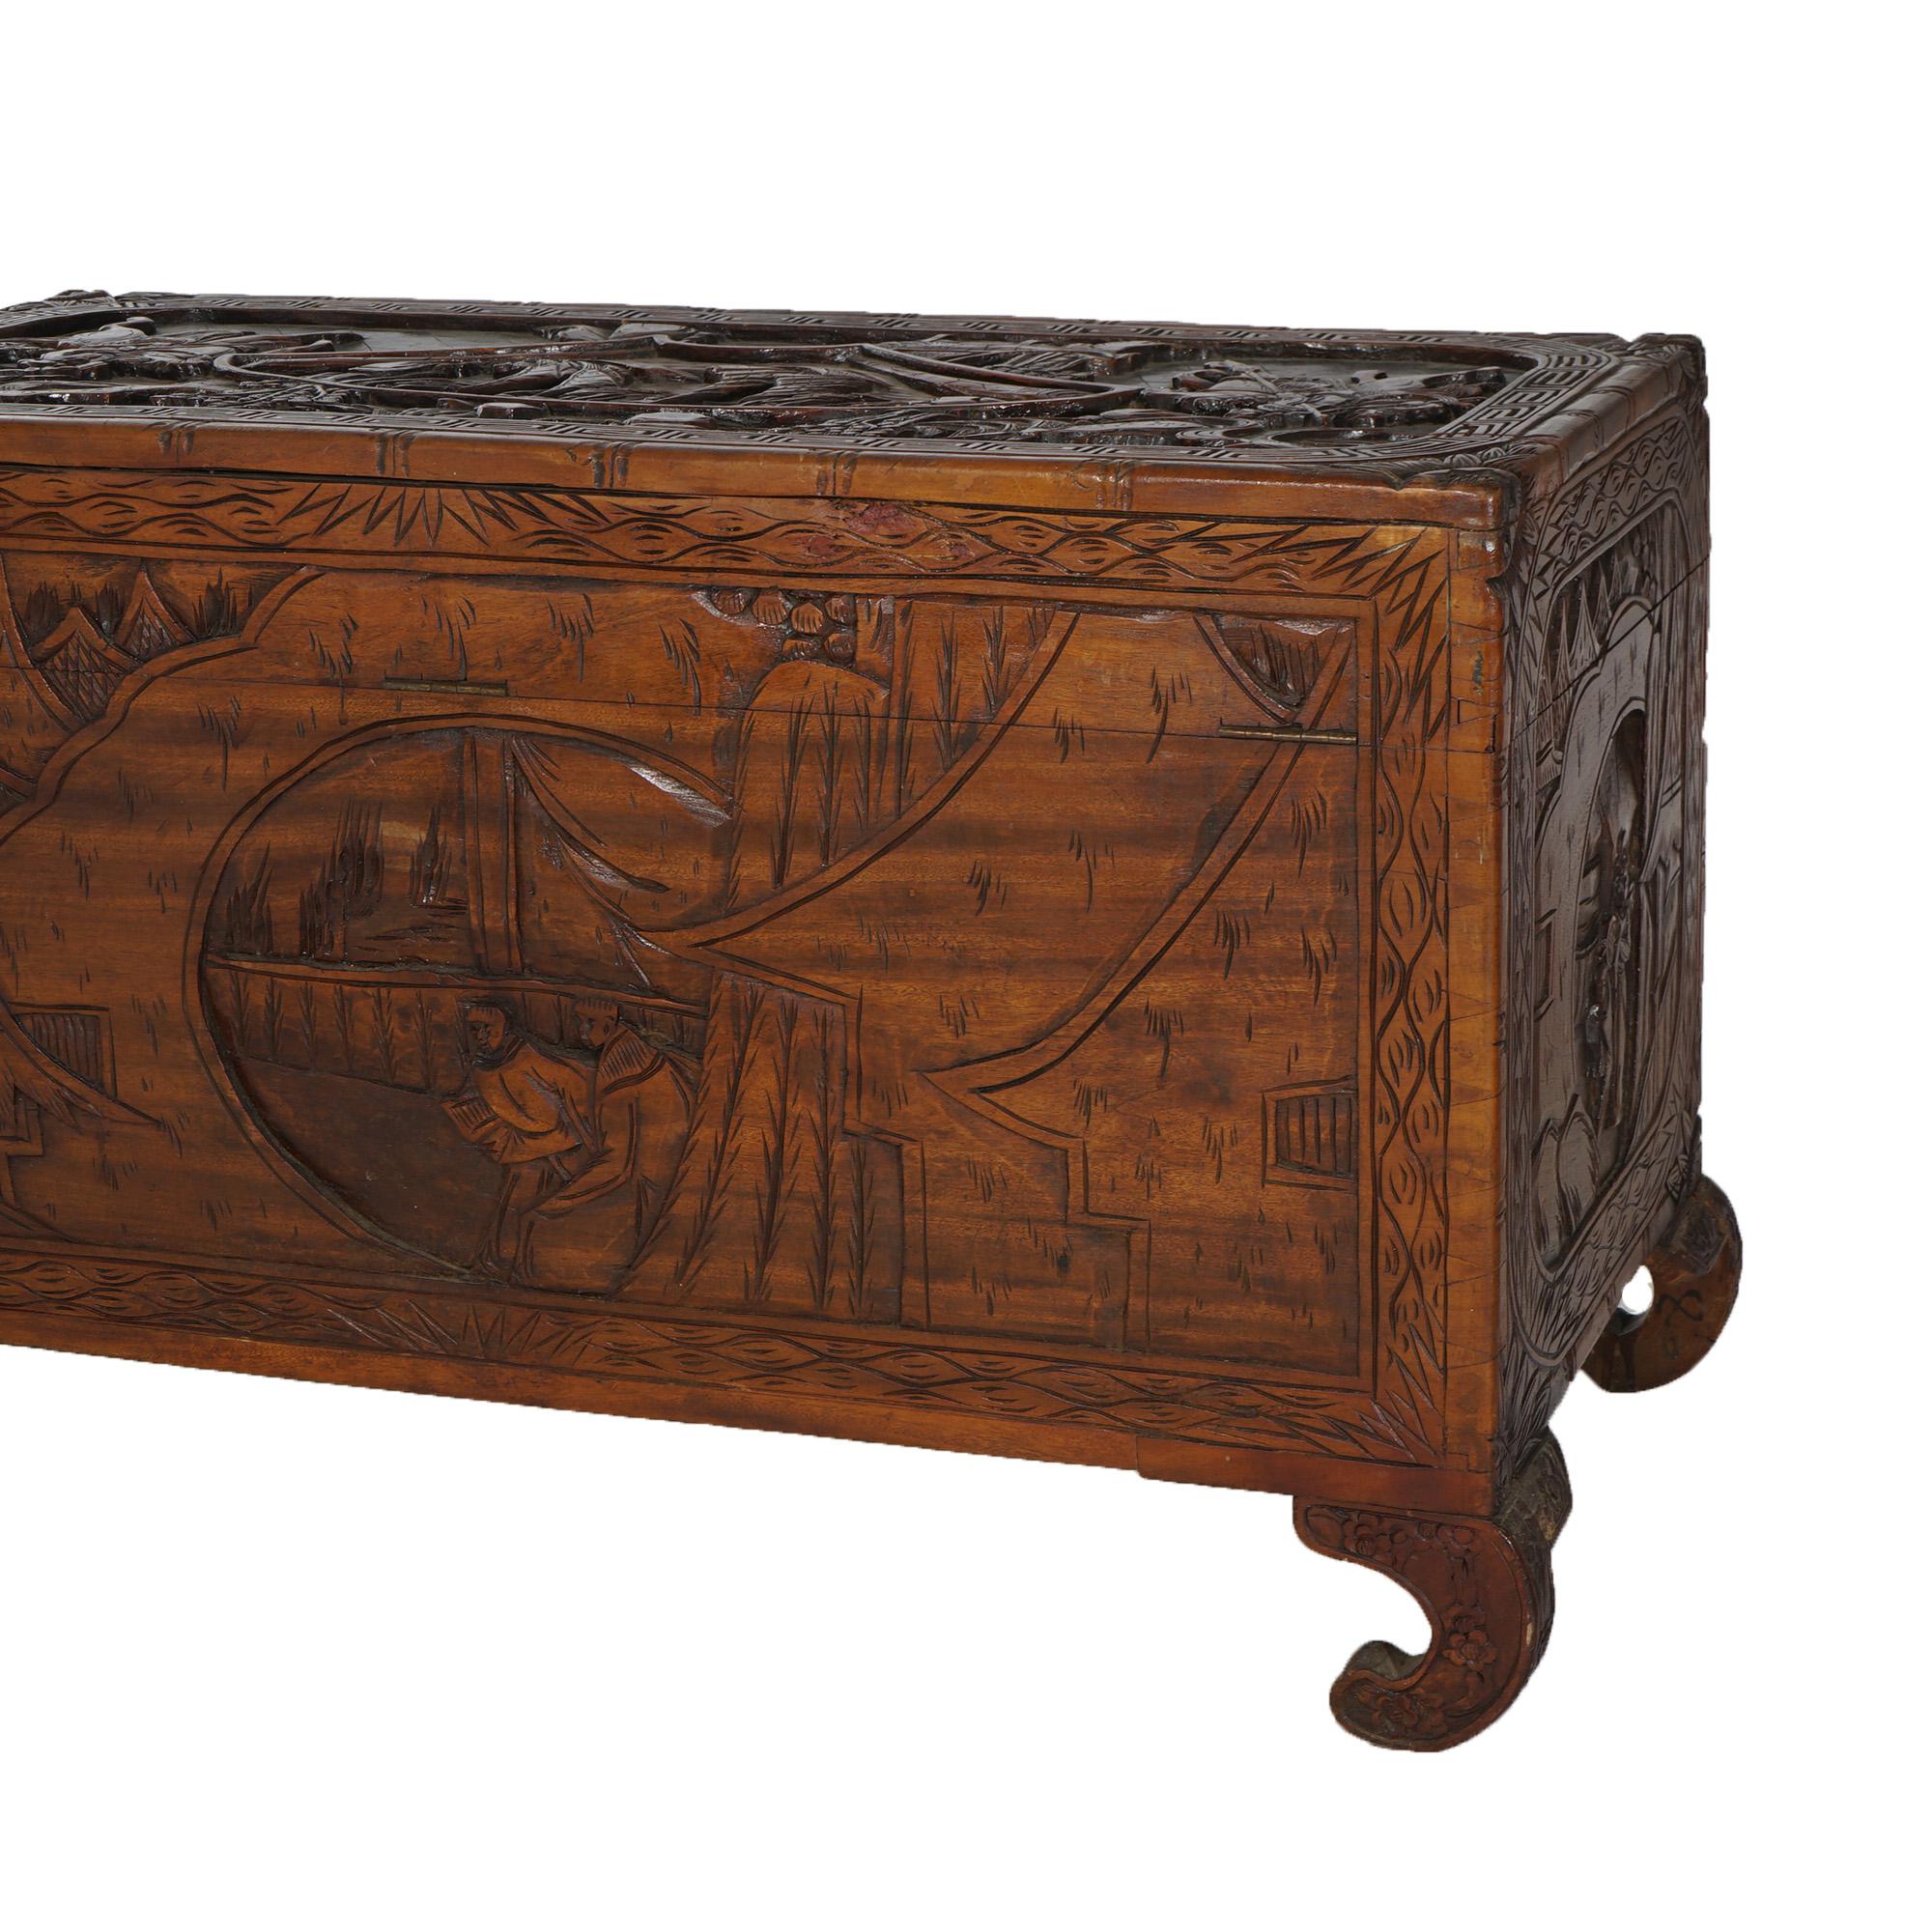 Antique Chinese Carved Hardwood Chest with Figures & Scenes in Relief C1920 For Sale 12